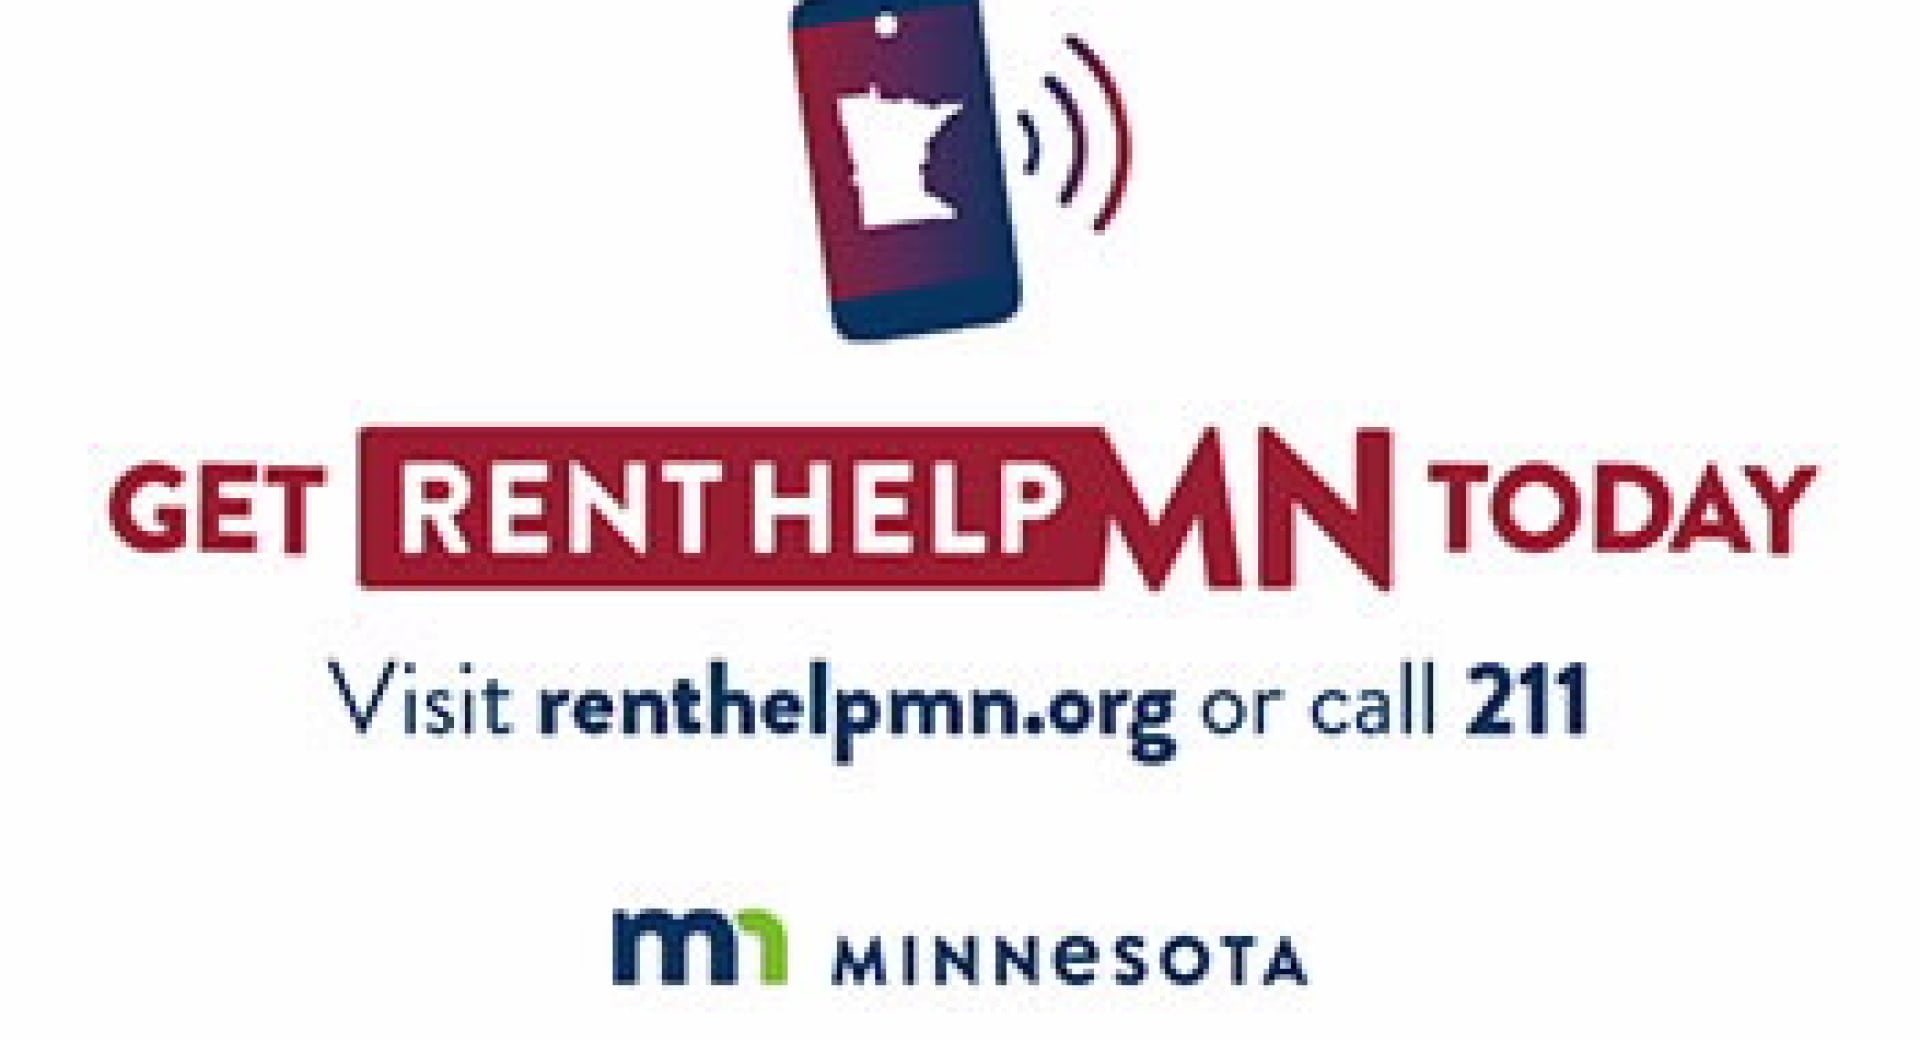 MN Housing launched online rental assistance portal for those impacted by COVID-19